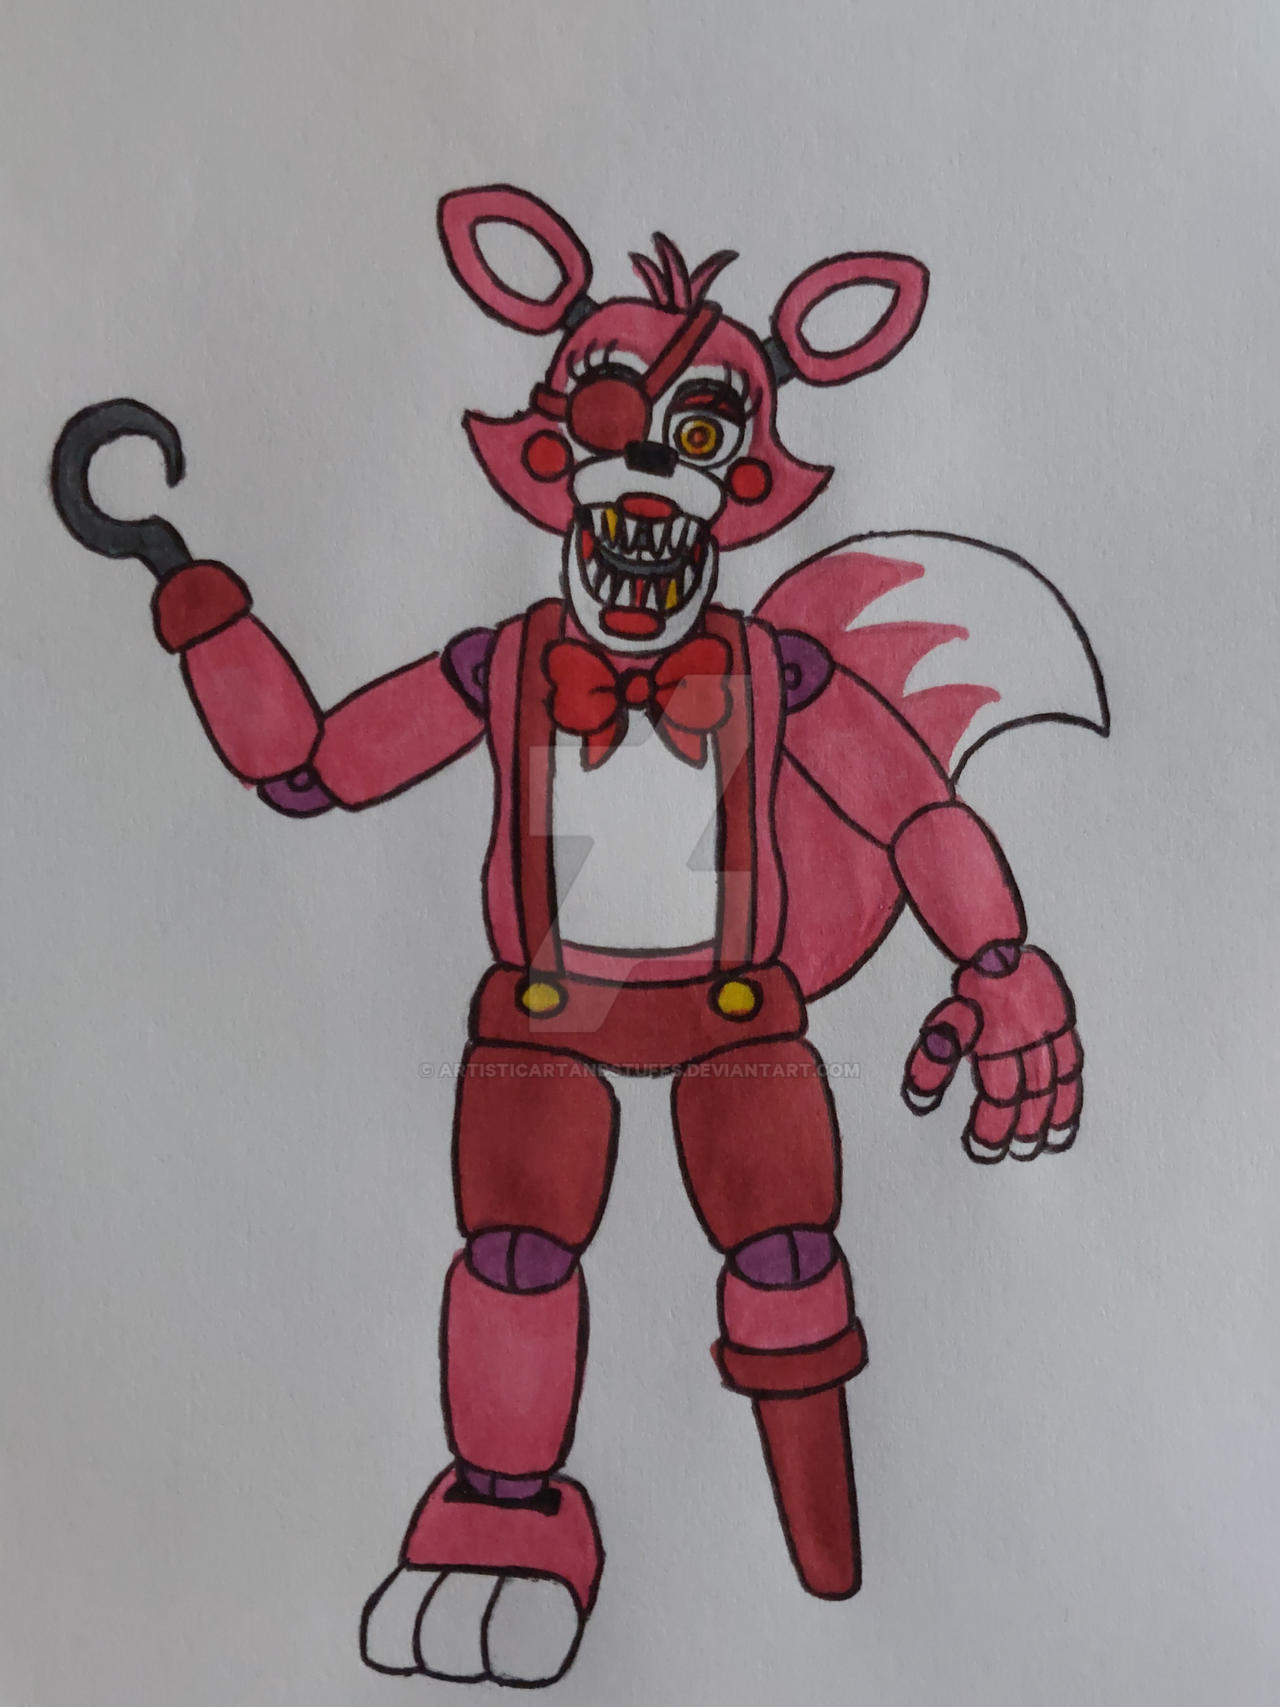 Withered foxy swap by NightmareFred2058 on DeviantArt